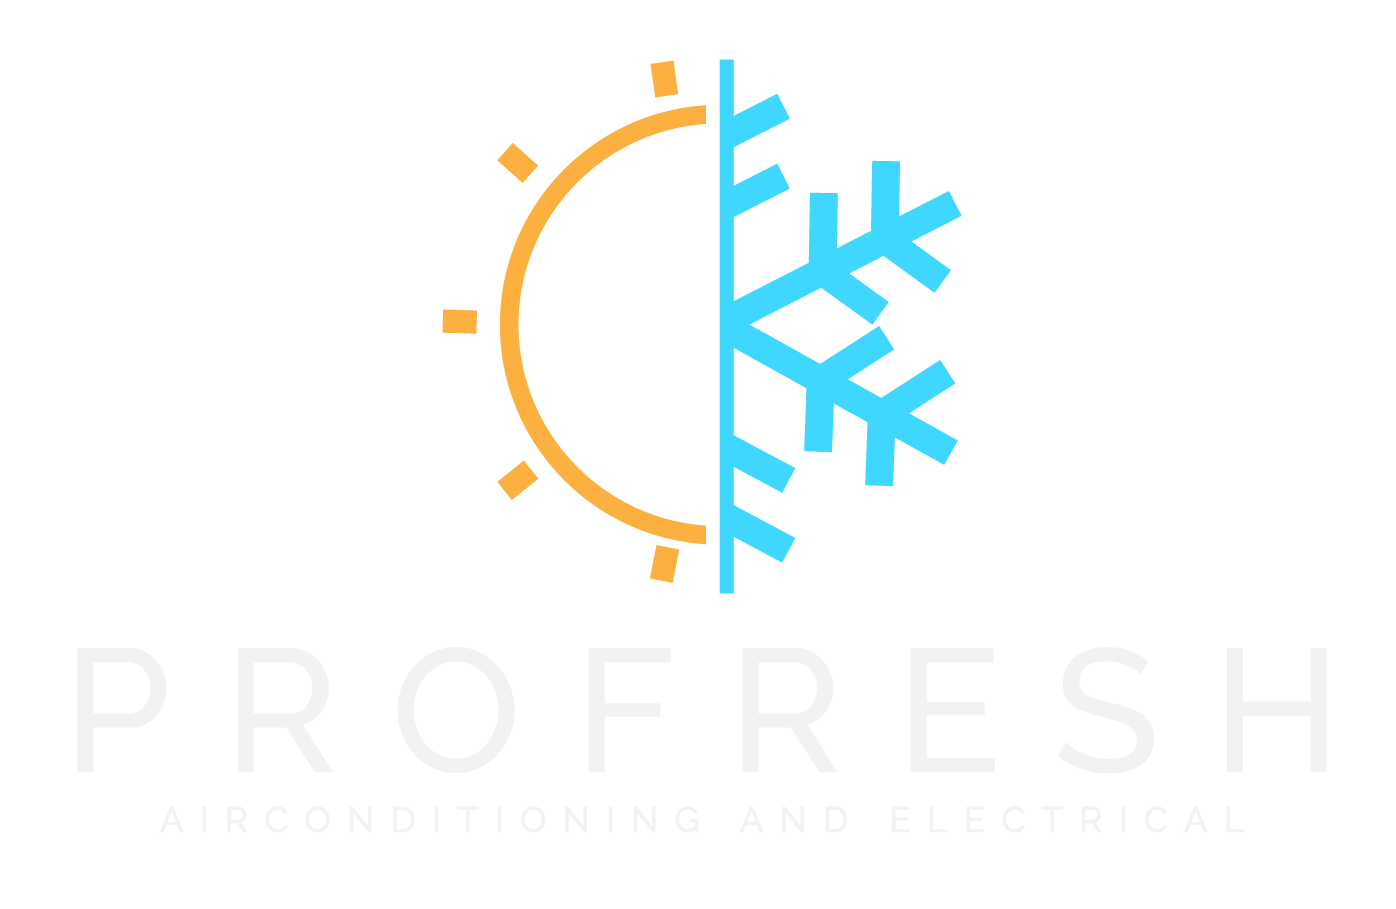 https://profreshgroup.com.au/wp-content/uploads/2022/04/cropped-Profresh-Airconditioning-and-Electrical-LOGO-B.png